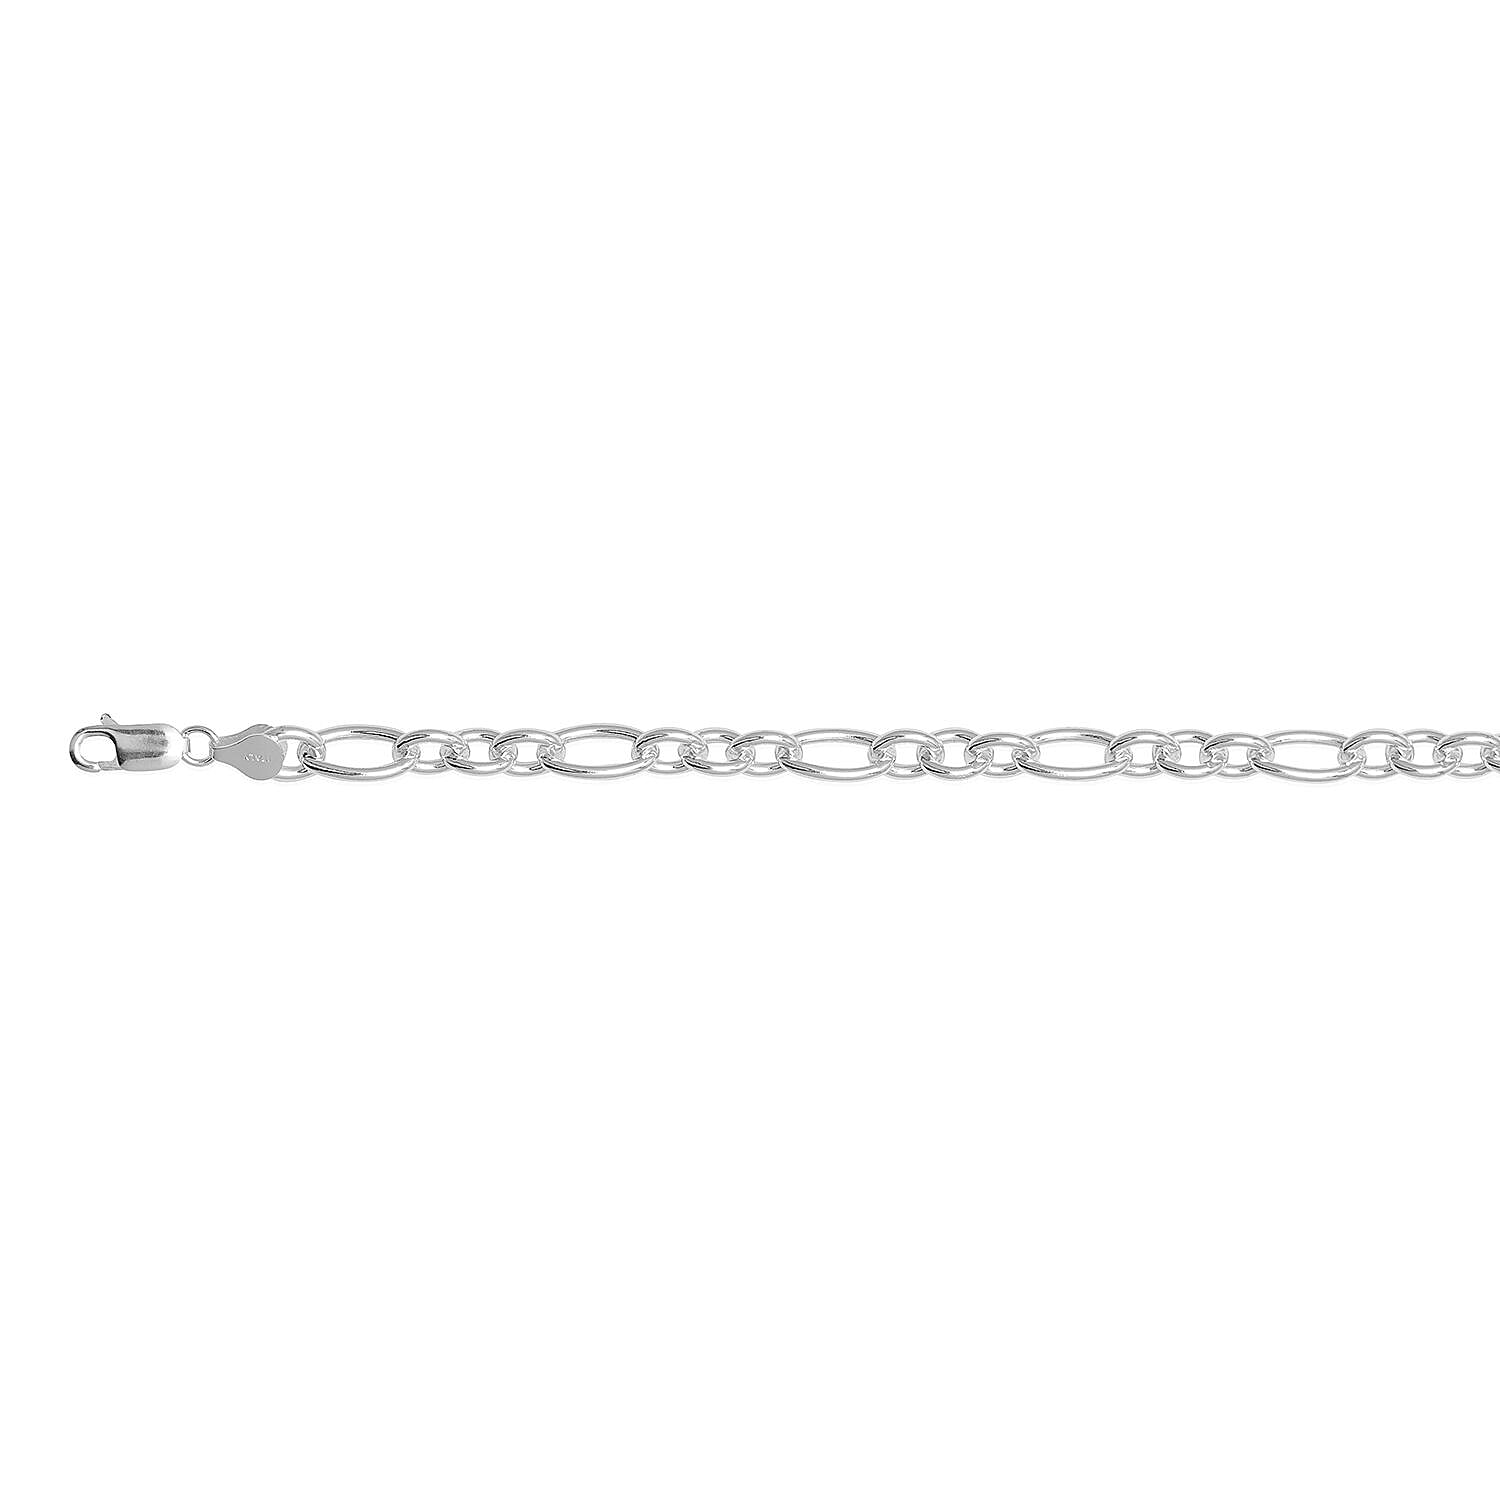 NY Closeout Deal - Highly Polished SOLID Link Necklace in Sterling Silver (Size 20) Silver Wt. 41.00 Gms (1.3 Troy Ounce)